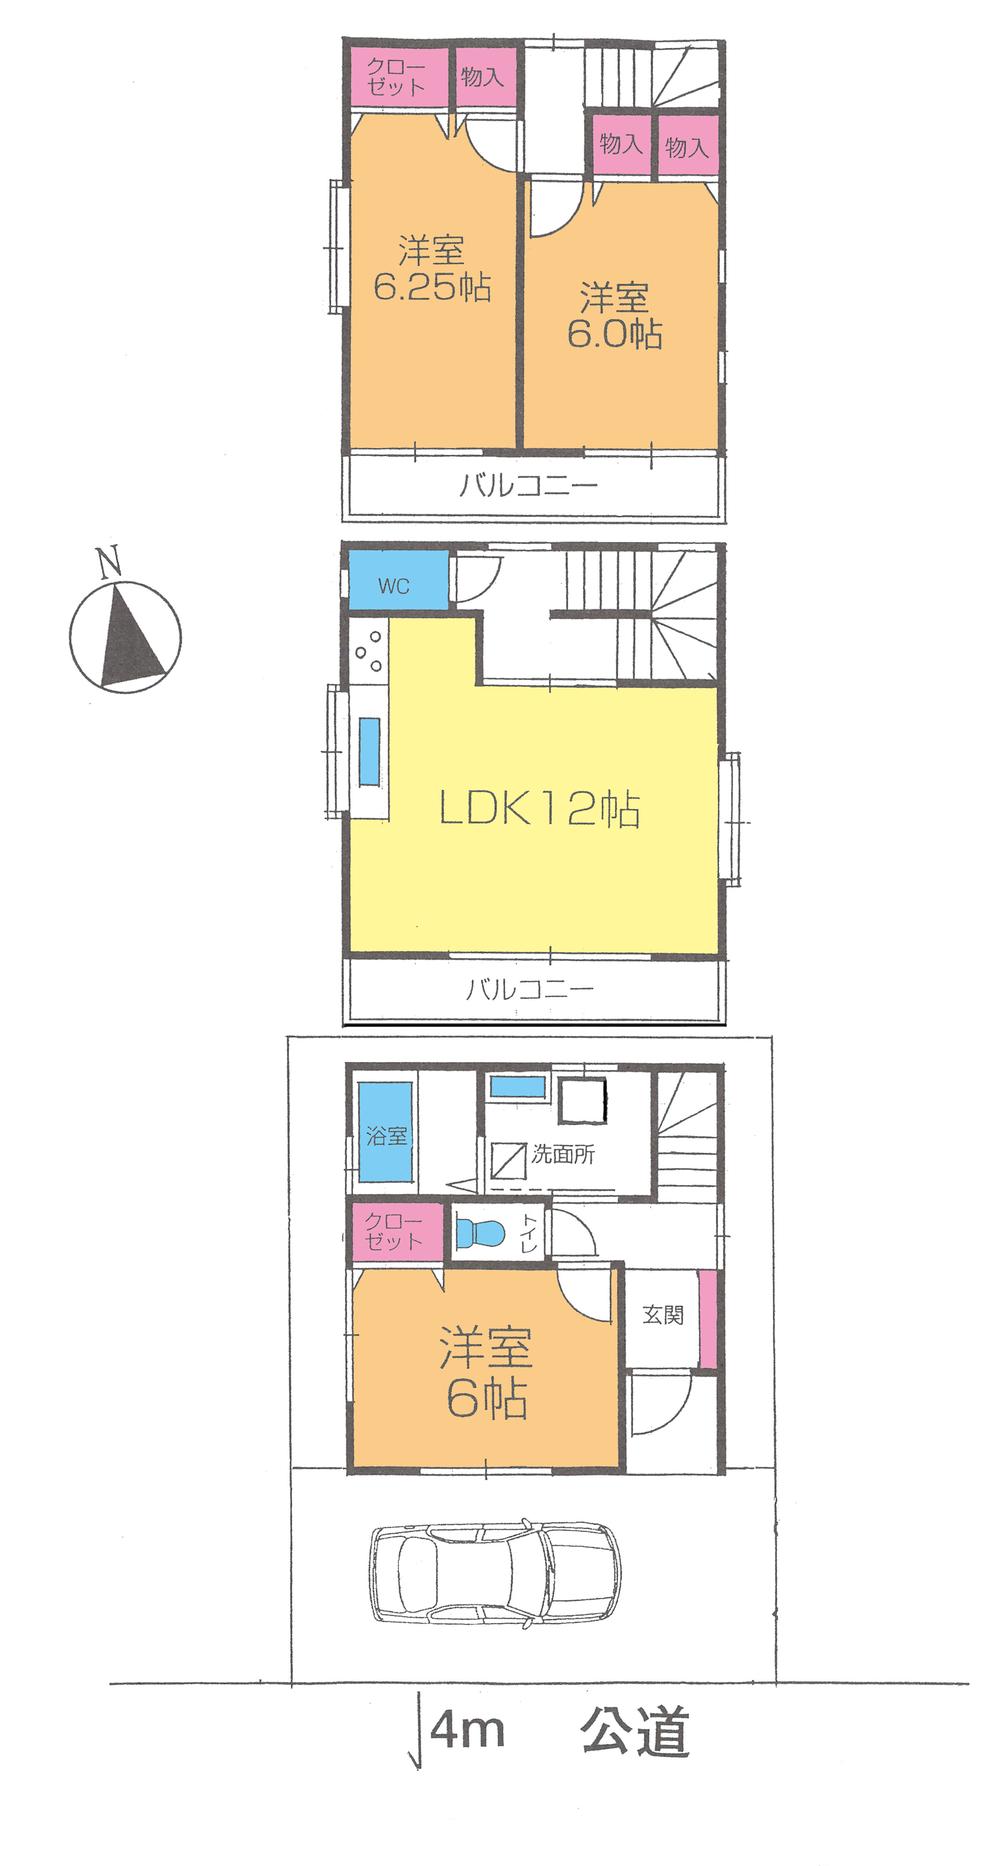 Compartment view + building plan example. Building plan example, Land price 12.4 million yen, Land area 53.86 sq m reference plan floor plan